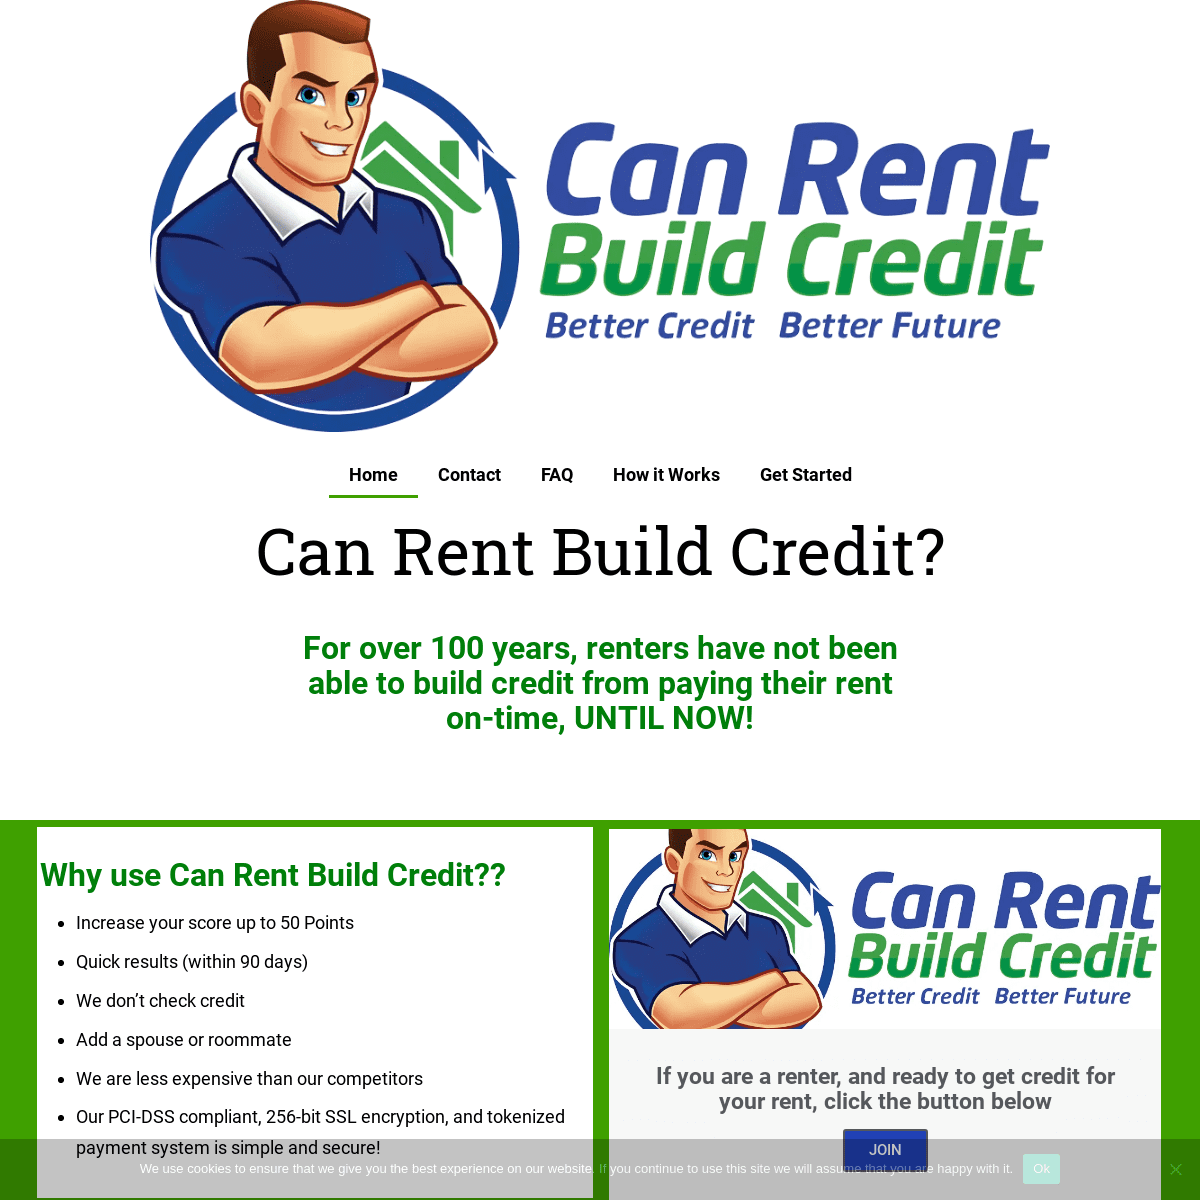 Home - Can Rent Build Credit can rent build credit